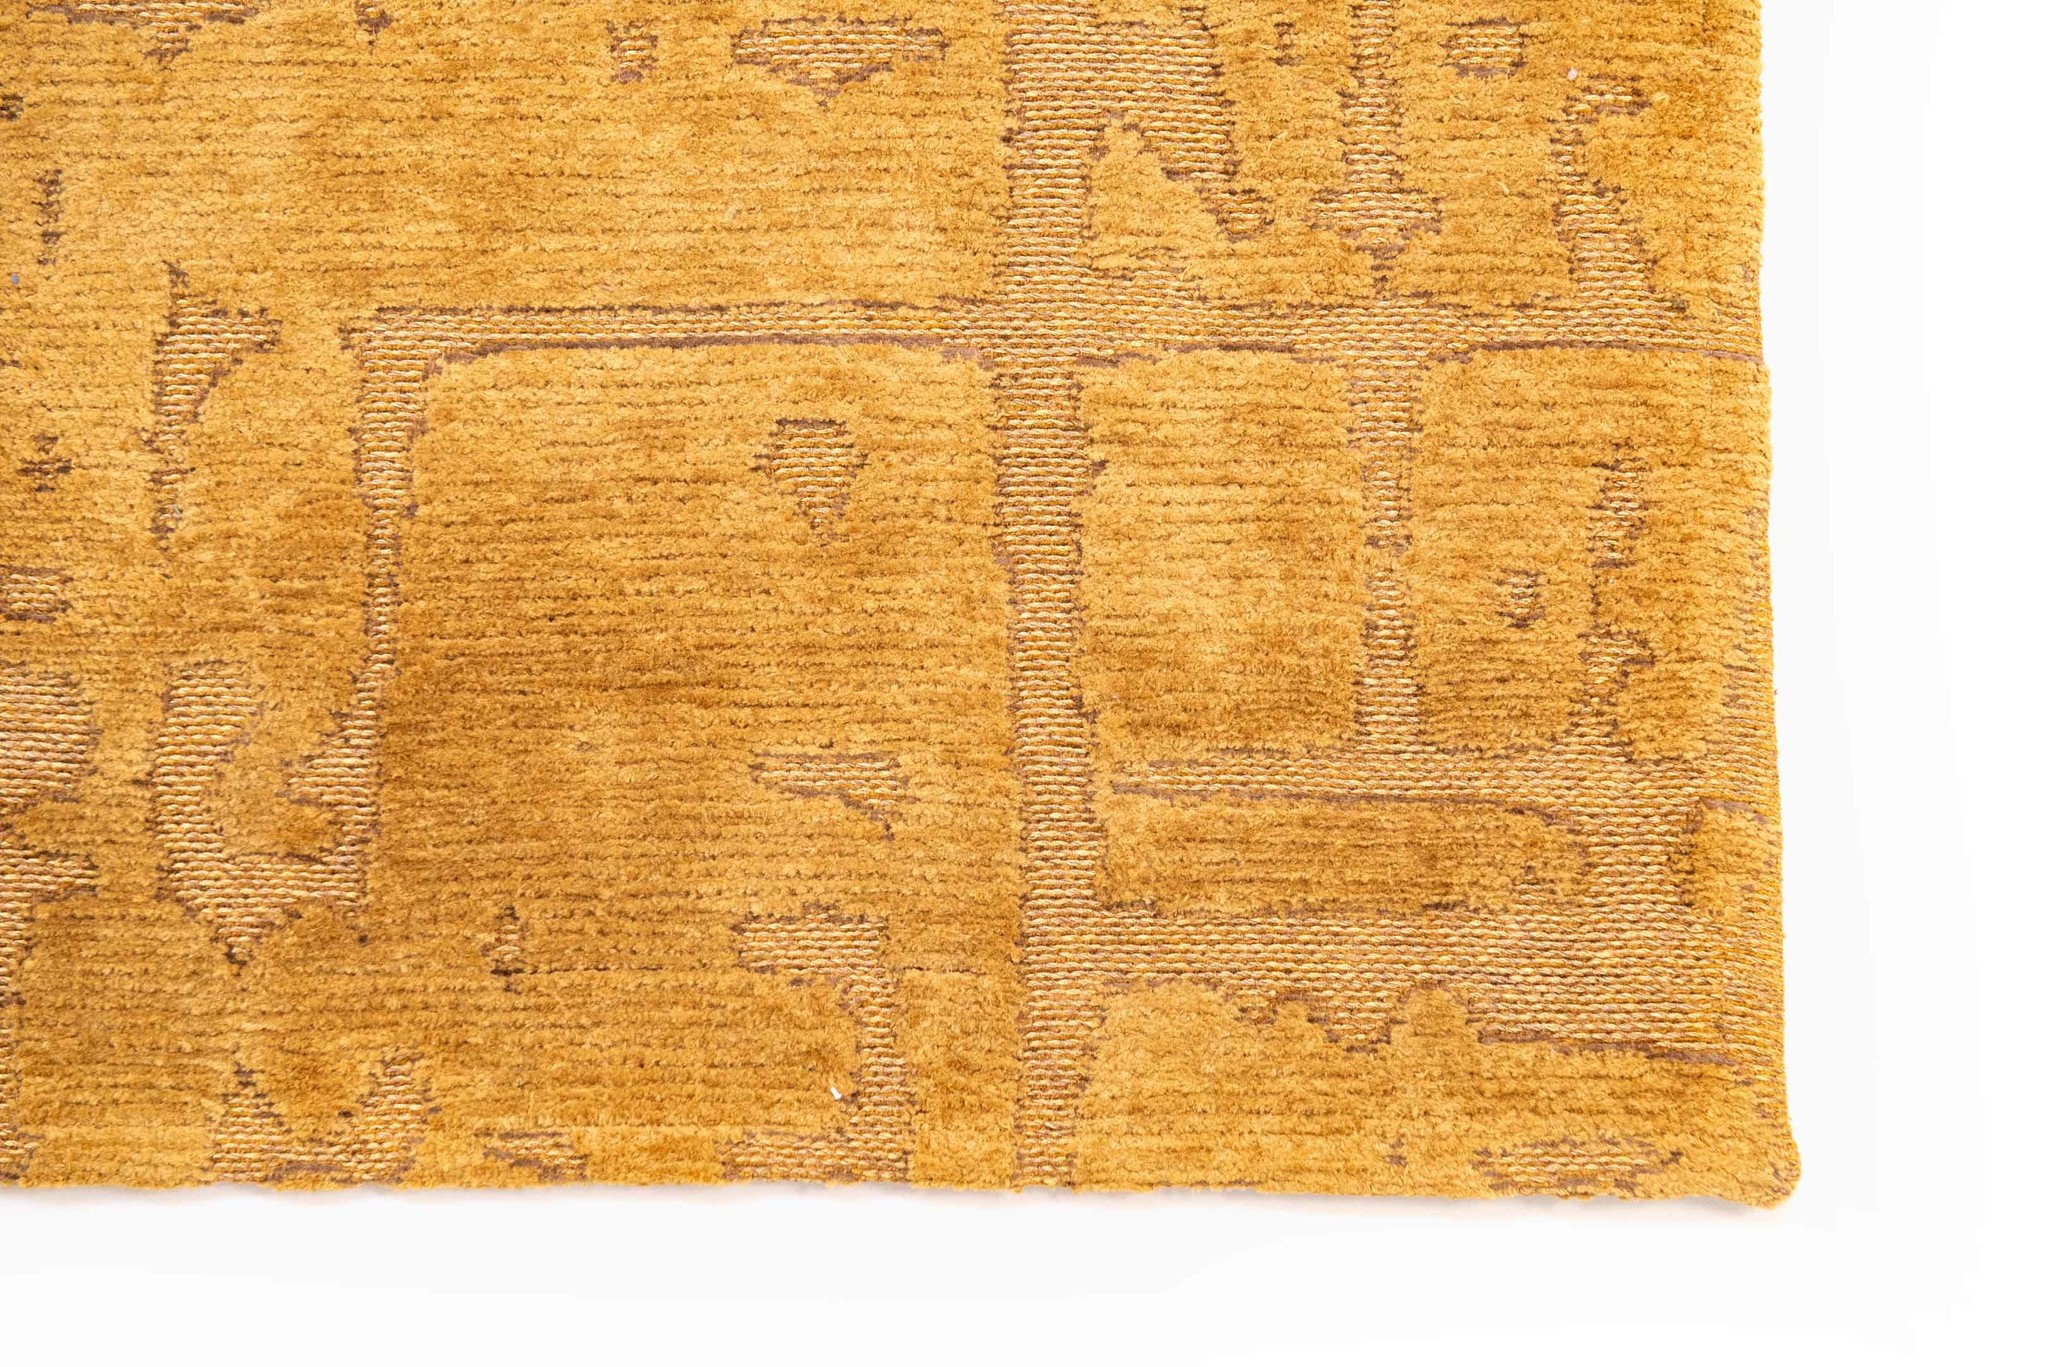 Abstract Gold Belgian Rug ☞ Size: 2' 7" x 5' (80 x 150 cm)